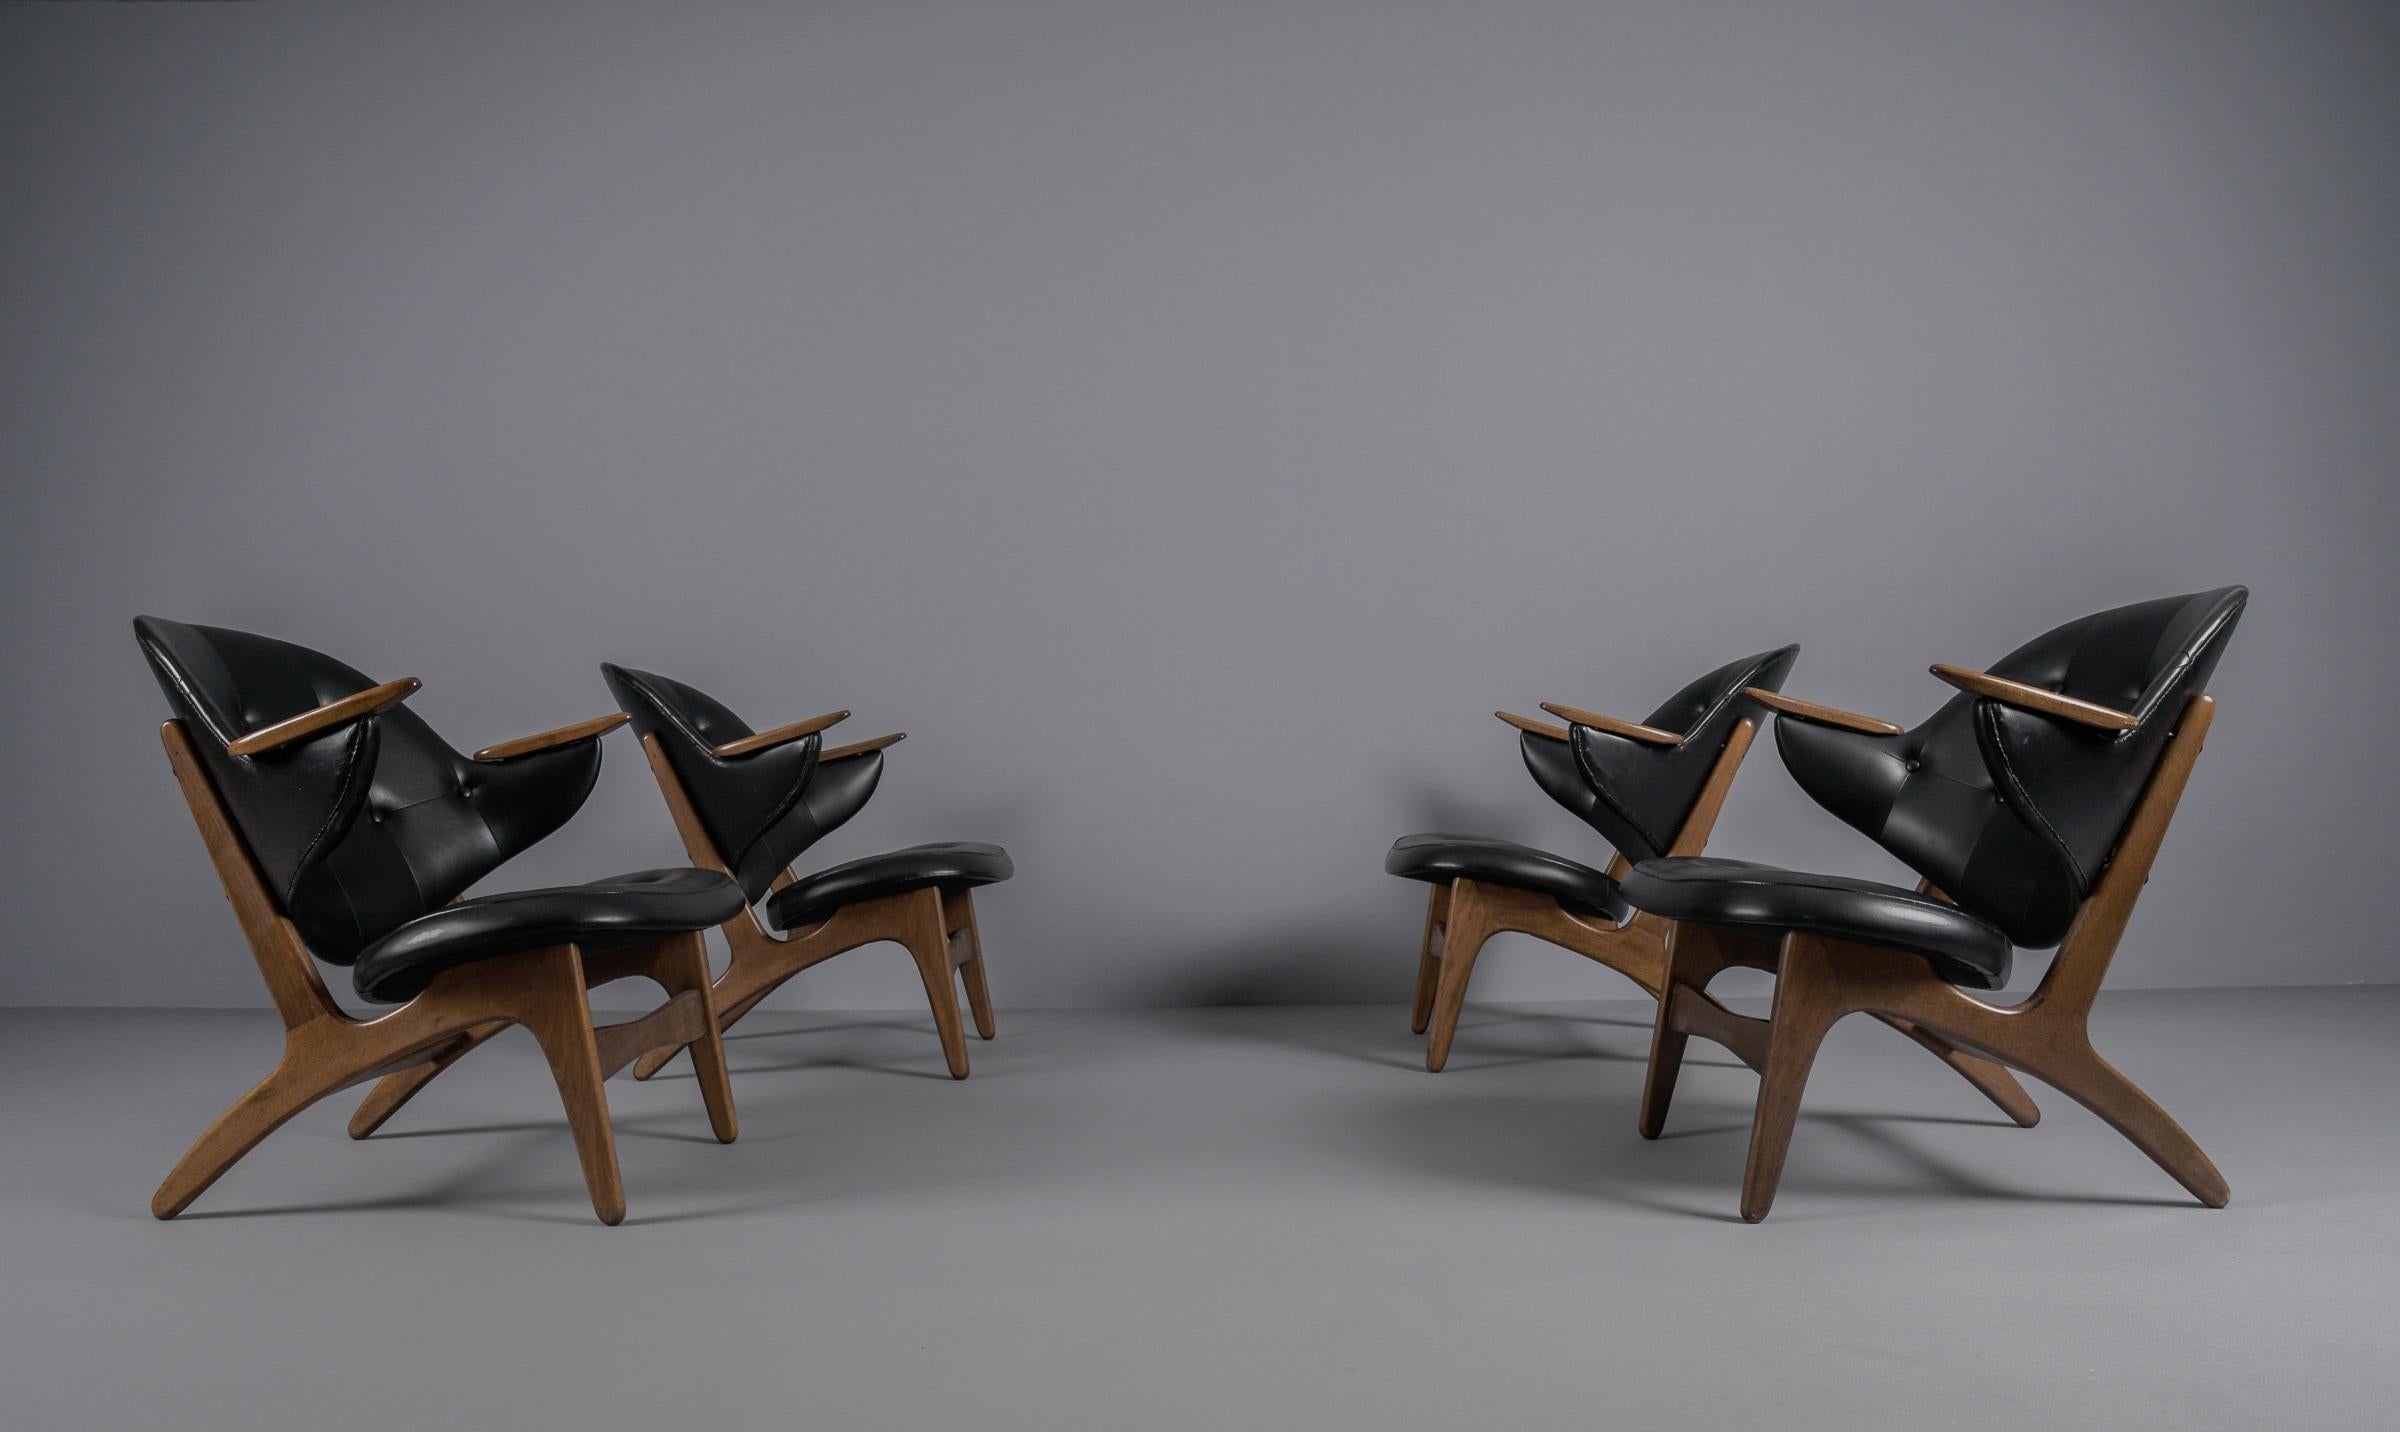 Mid-20th Century Set of 4 Rare Model 33 Danish Easy Chairs Designed by Carl Edward Matthes, 1950s For Sale